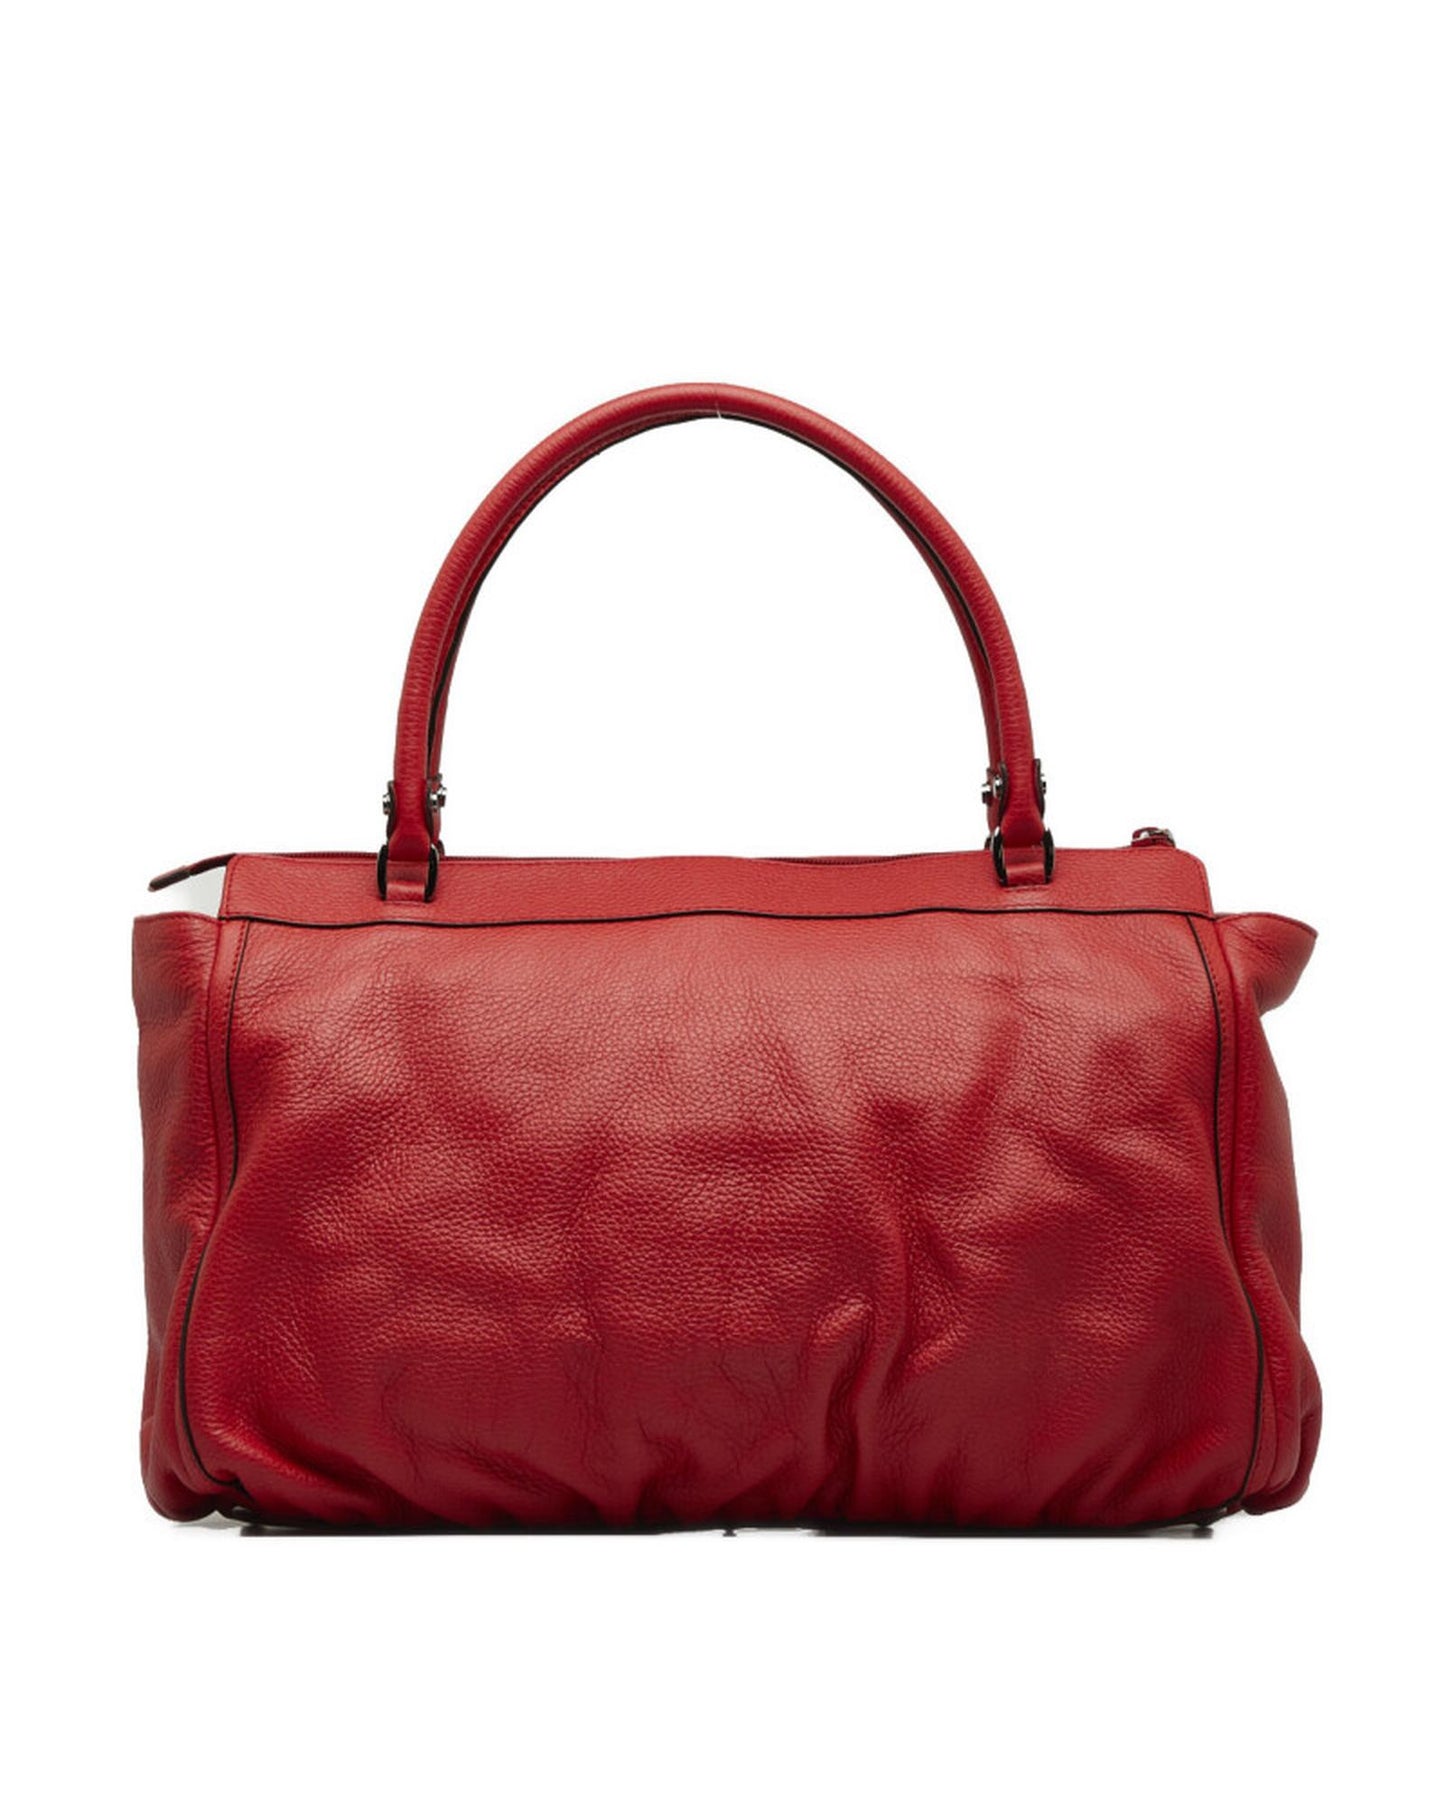 Gucci Women's Red Leather D-Ring Handbag in Excellent Condition in Red